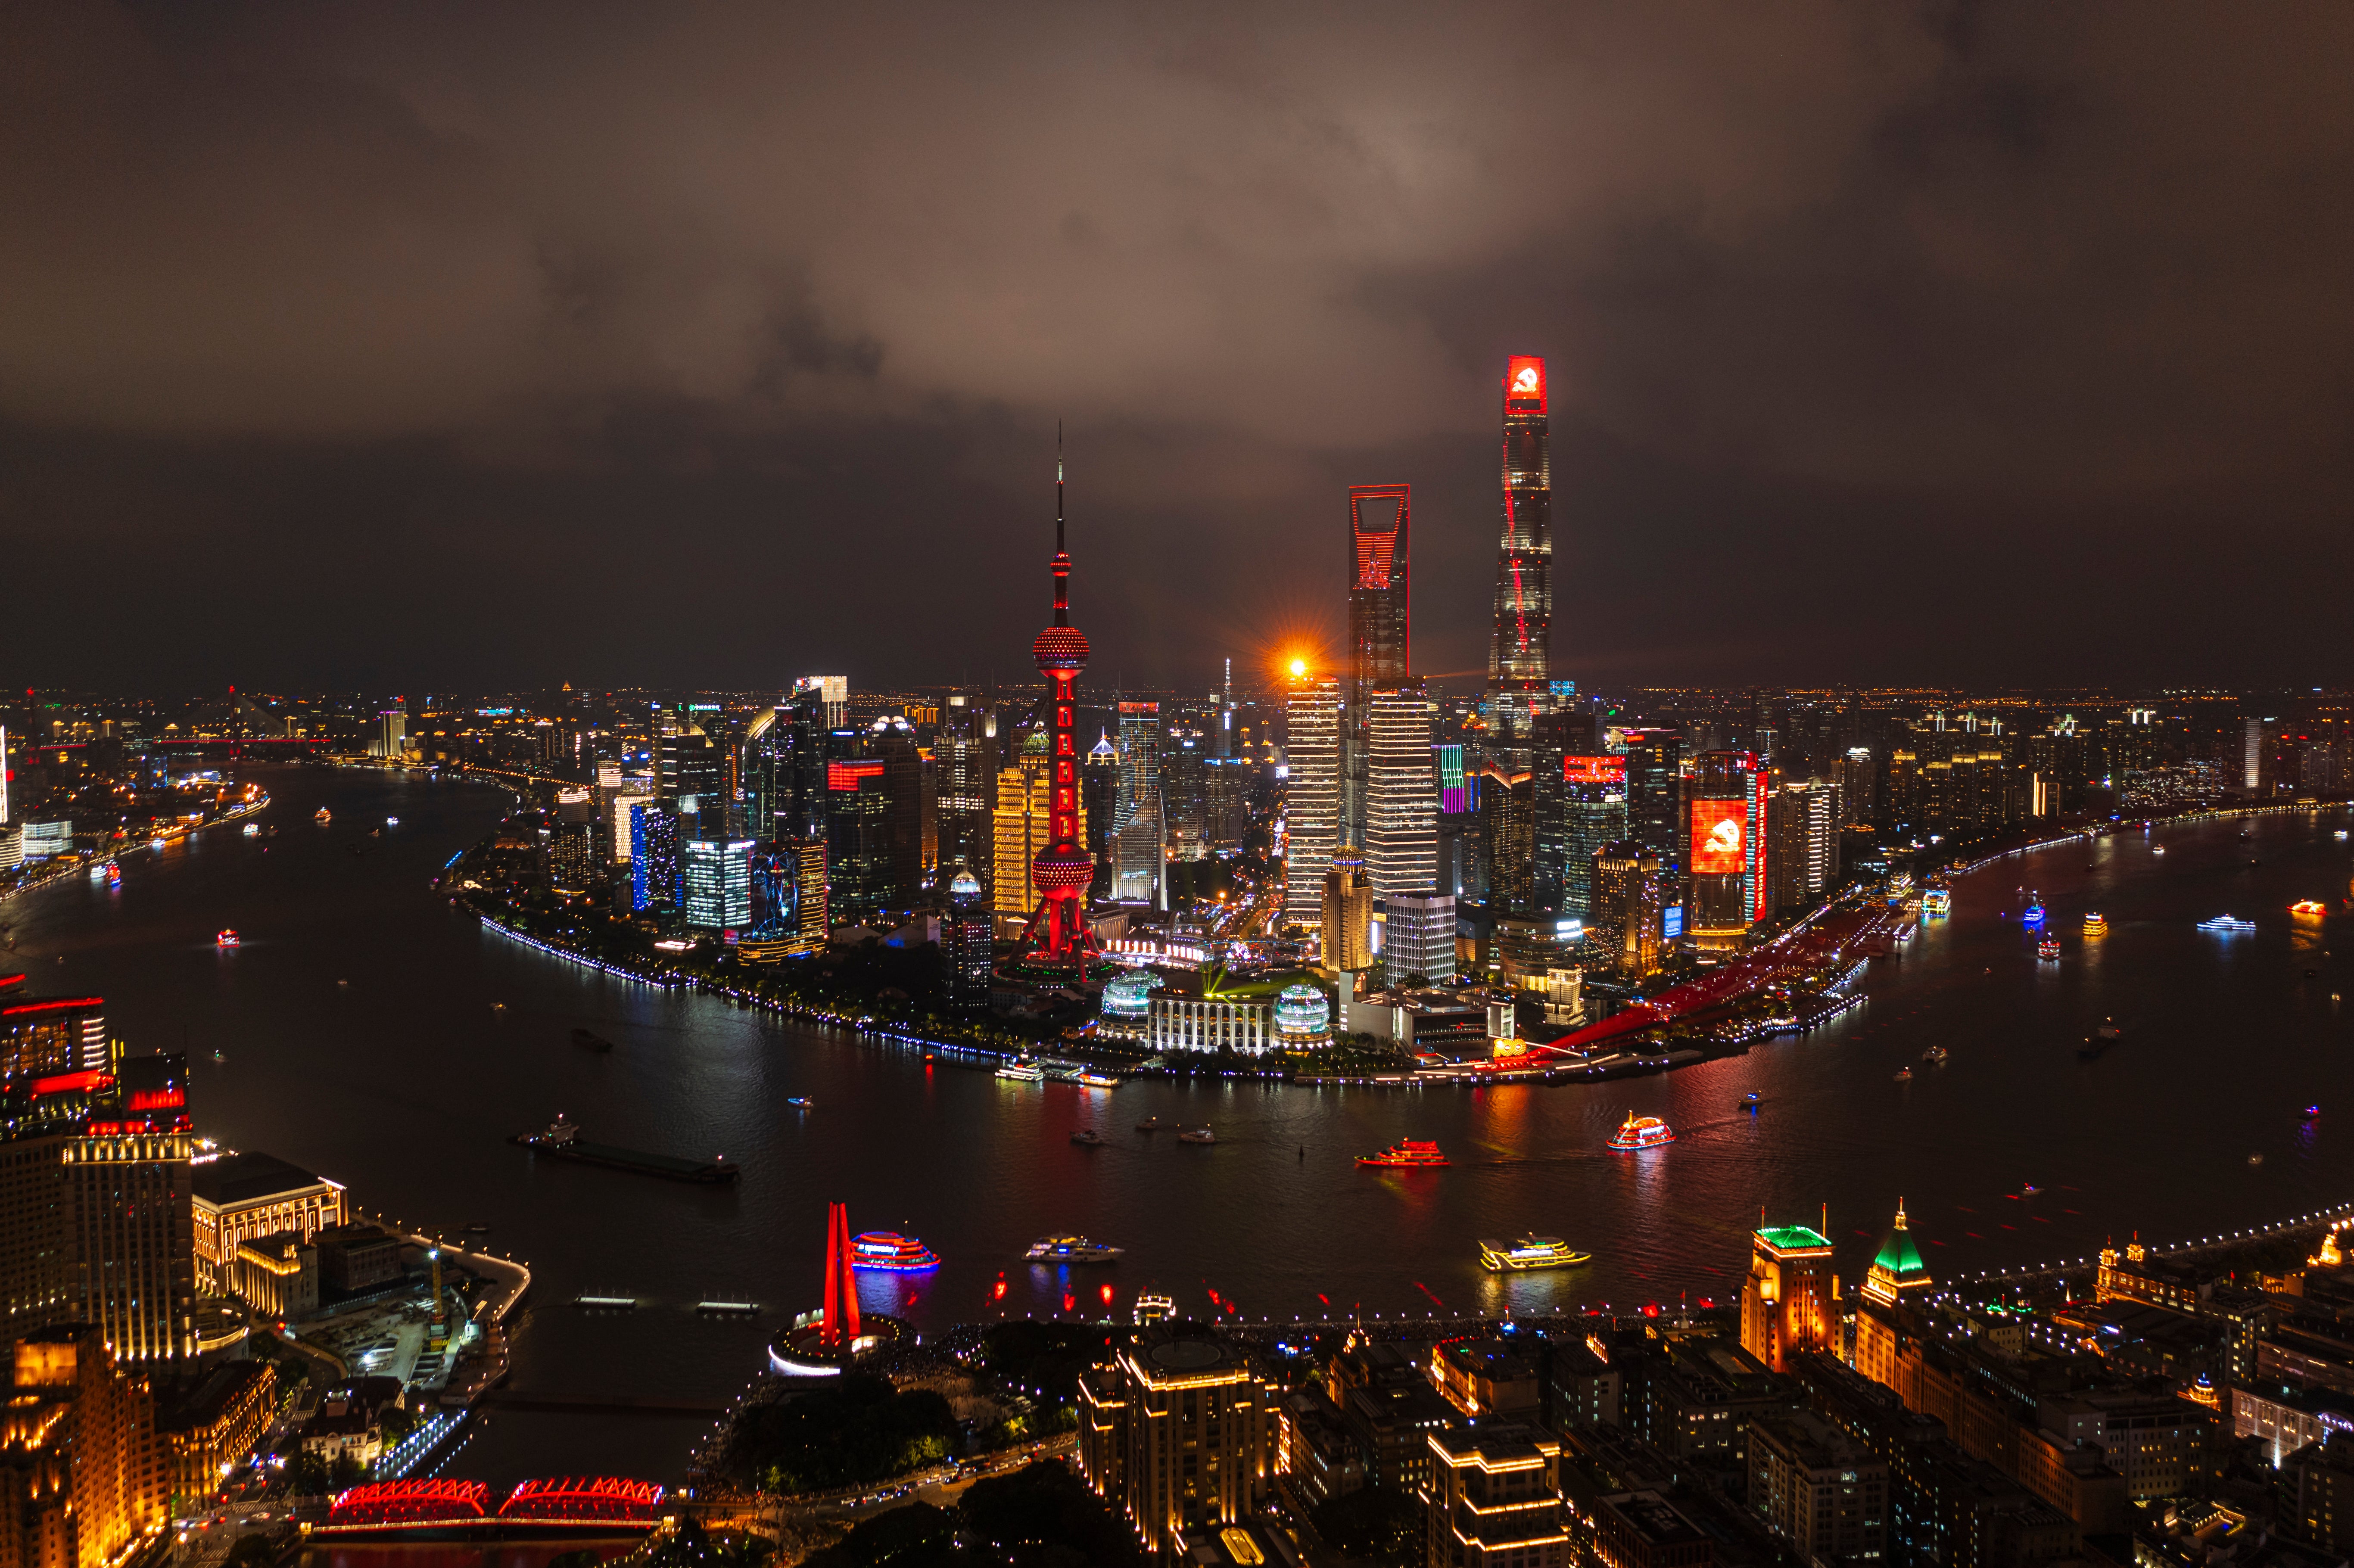 An aerial view of Shanghai at night